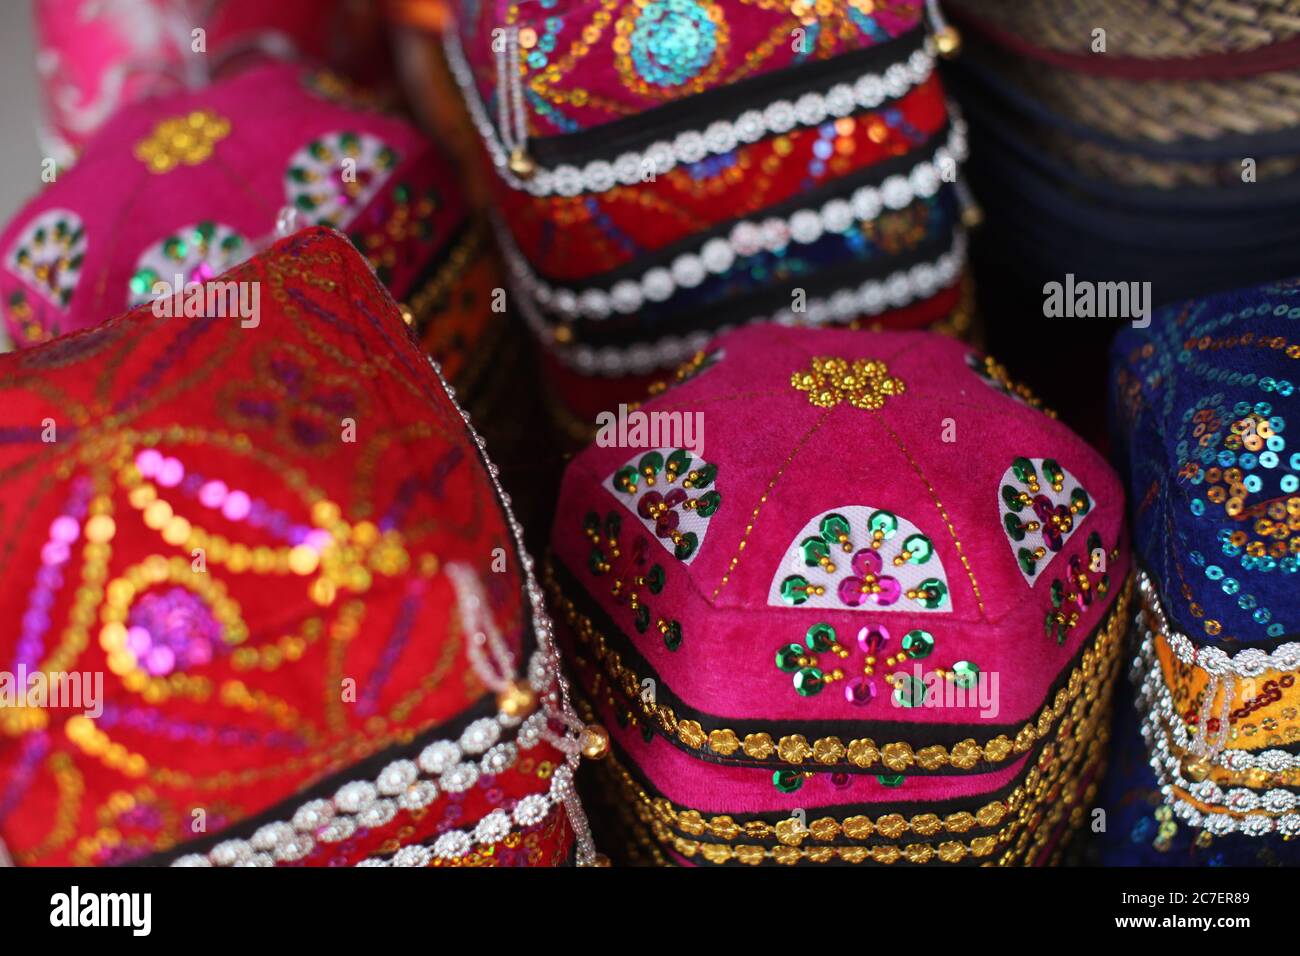 Closeup shot of beautiful colorful containers with Chinese embroidery art Stock Photo